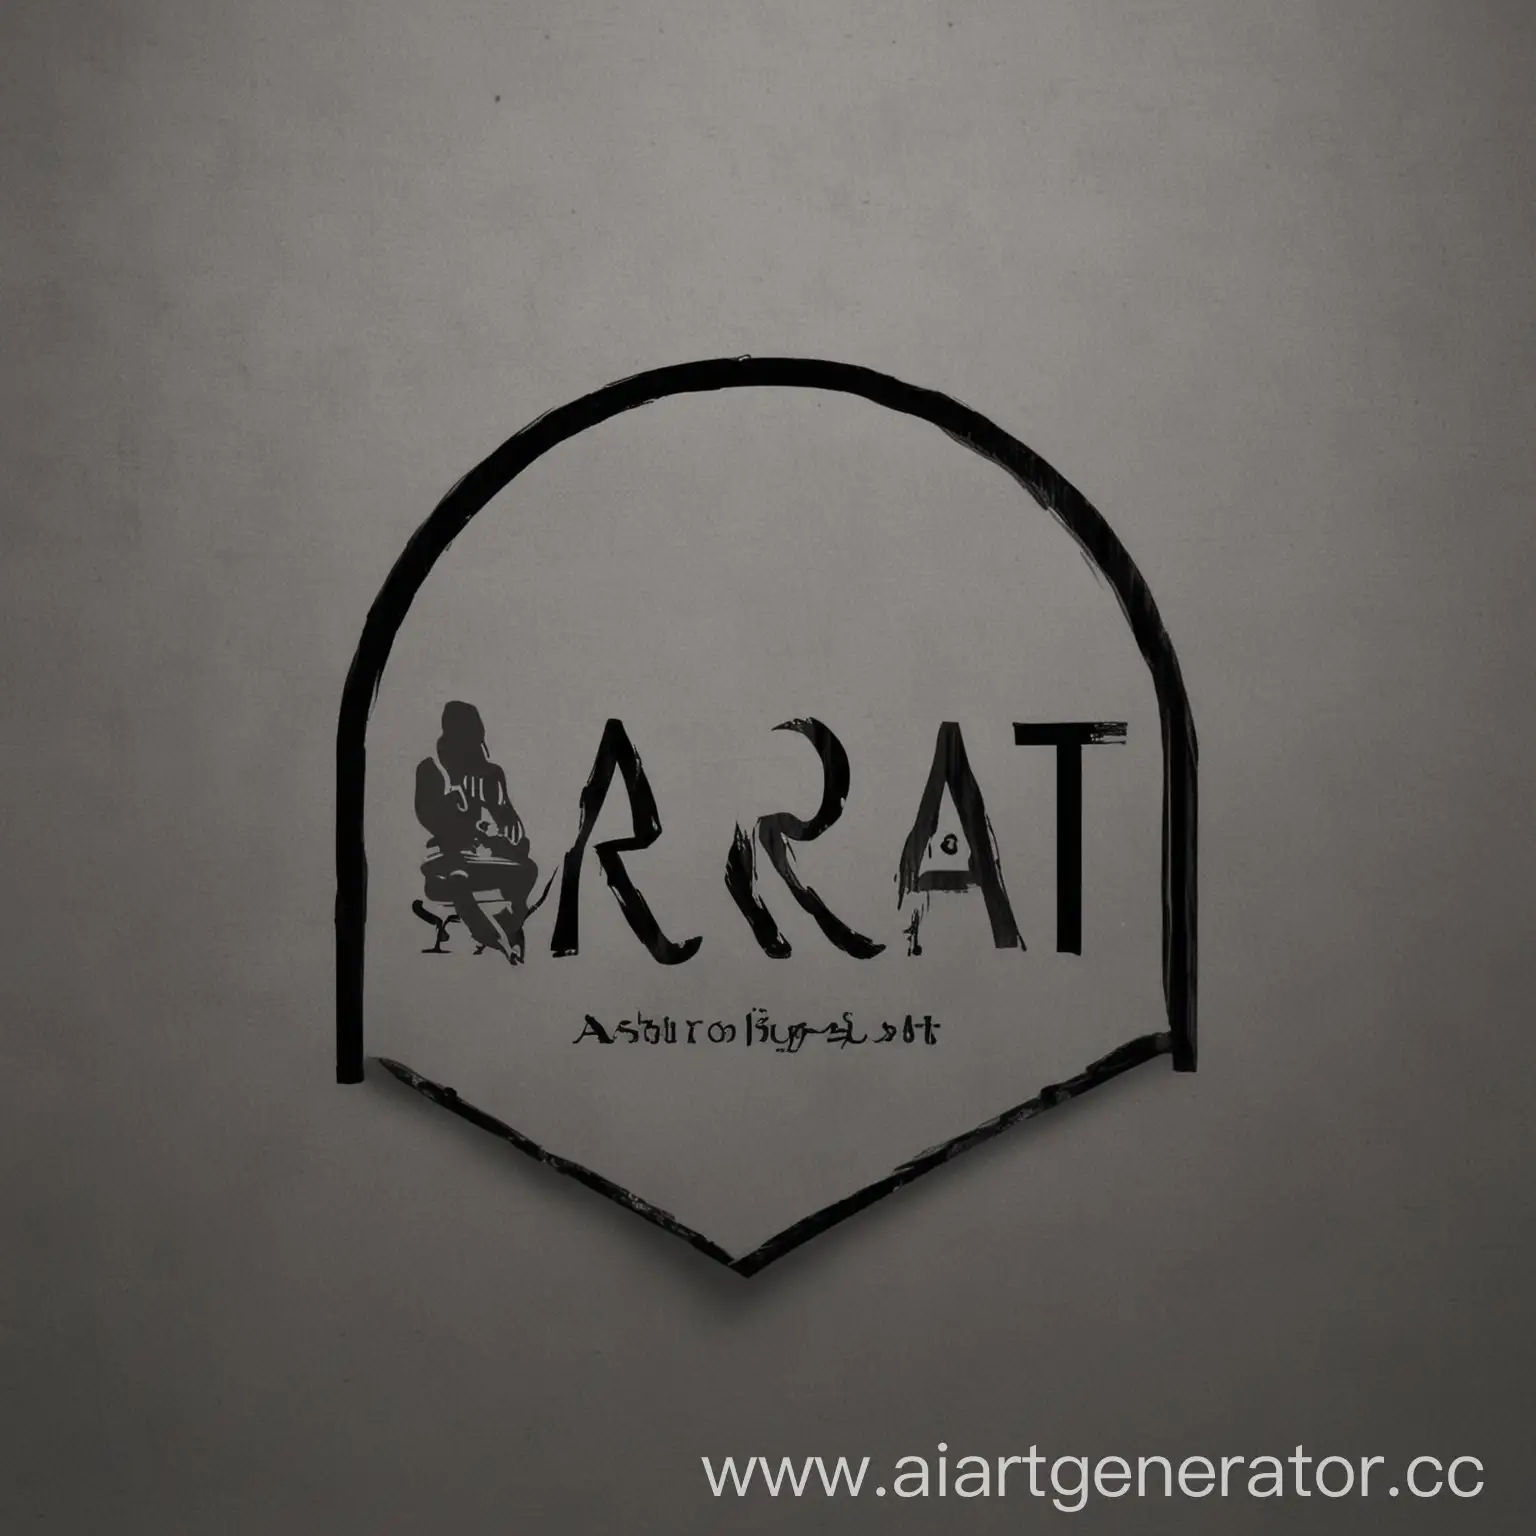 Simple black logo for Arbat with a bench and arch  logo